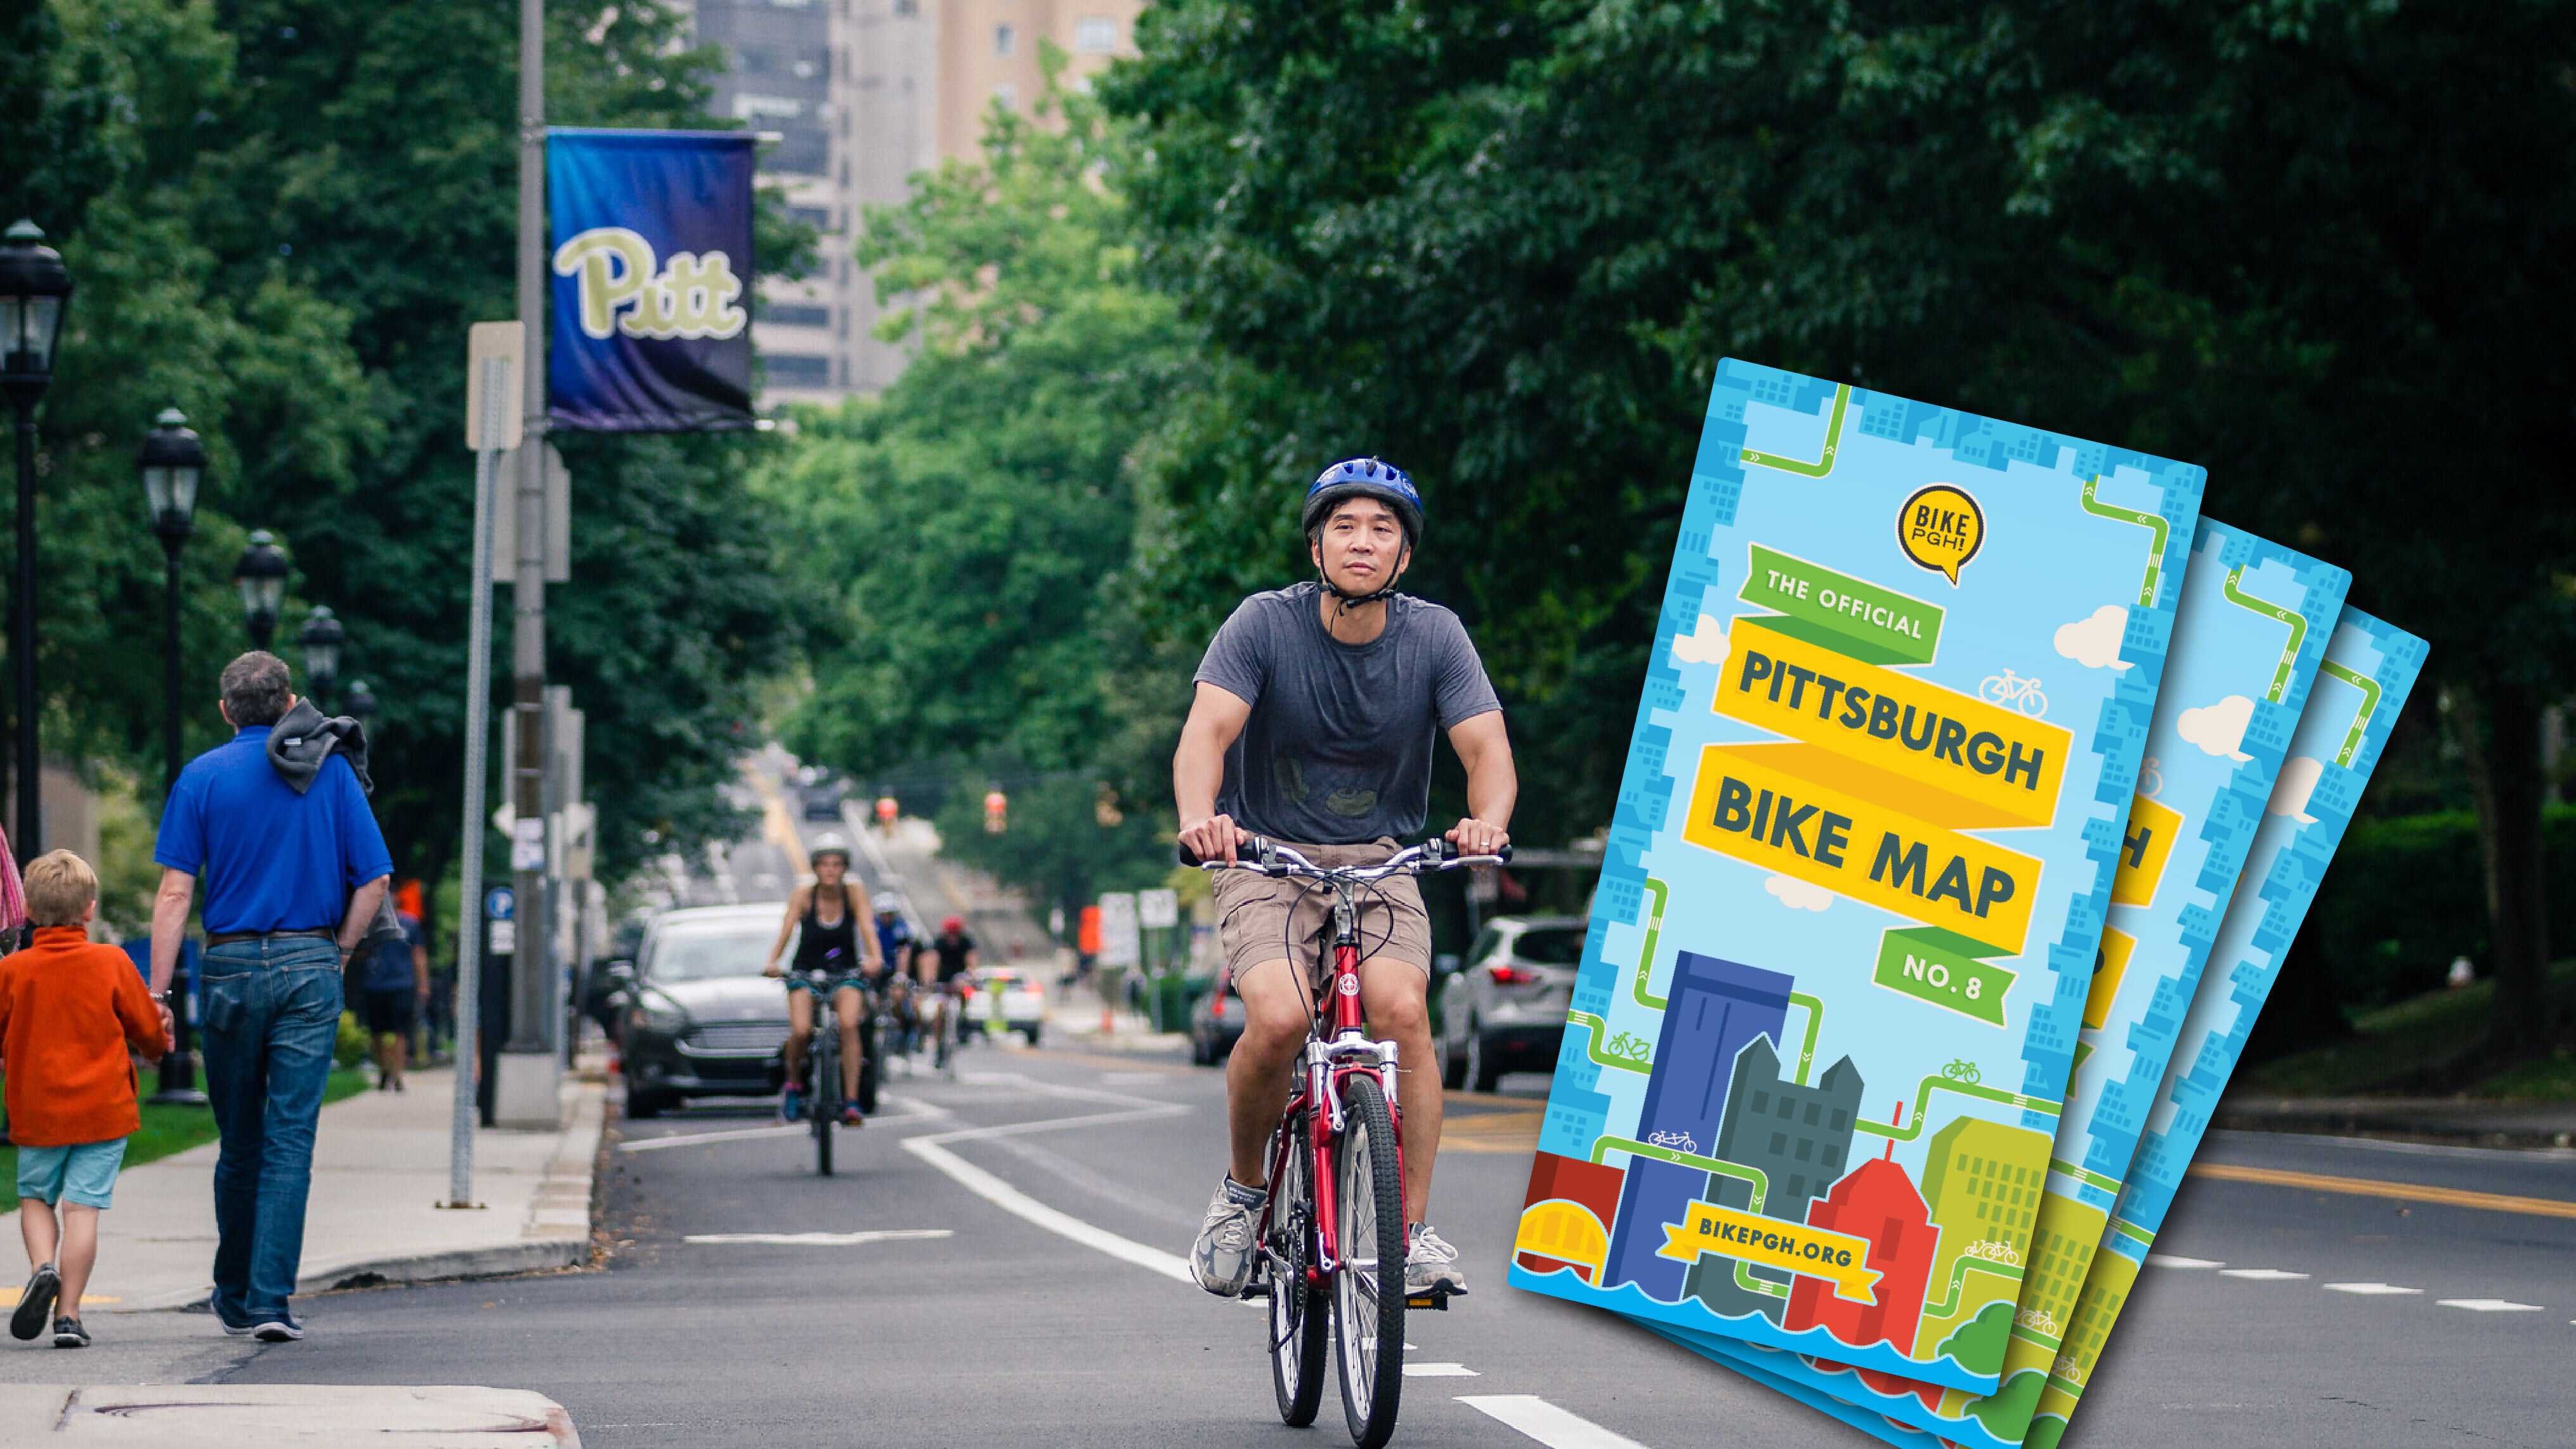 Introducing The Official Pittsburgh Bike Map Version 8! BikePGH BikePGH